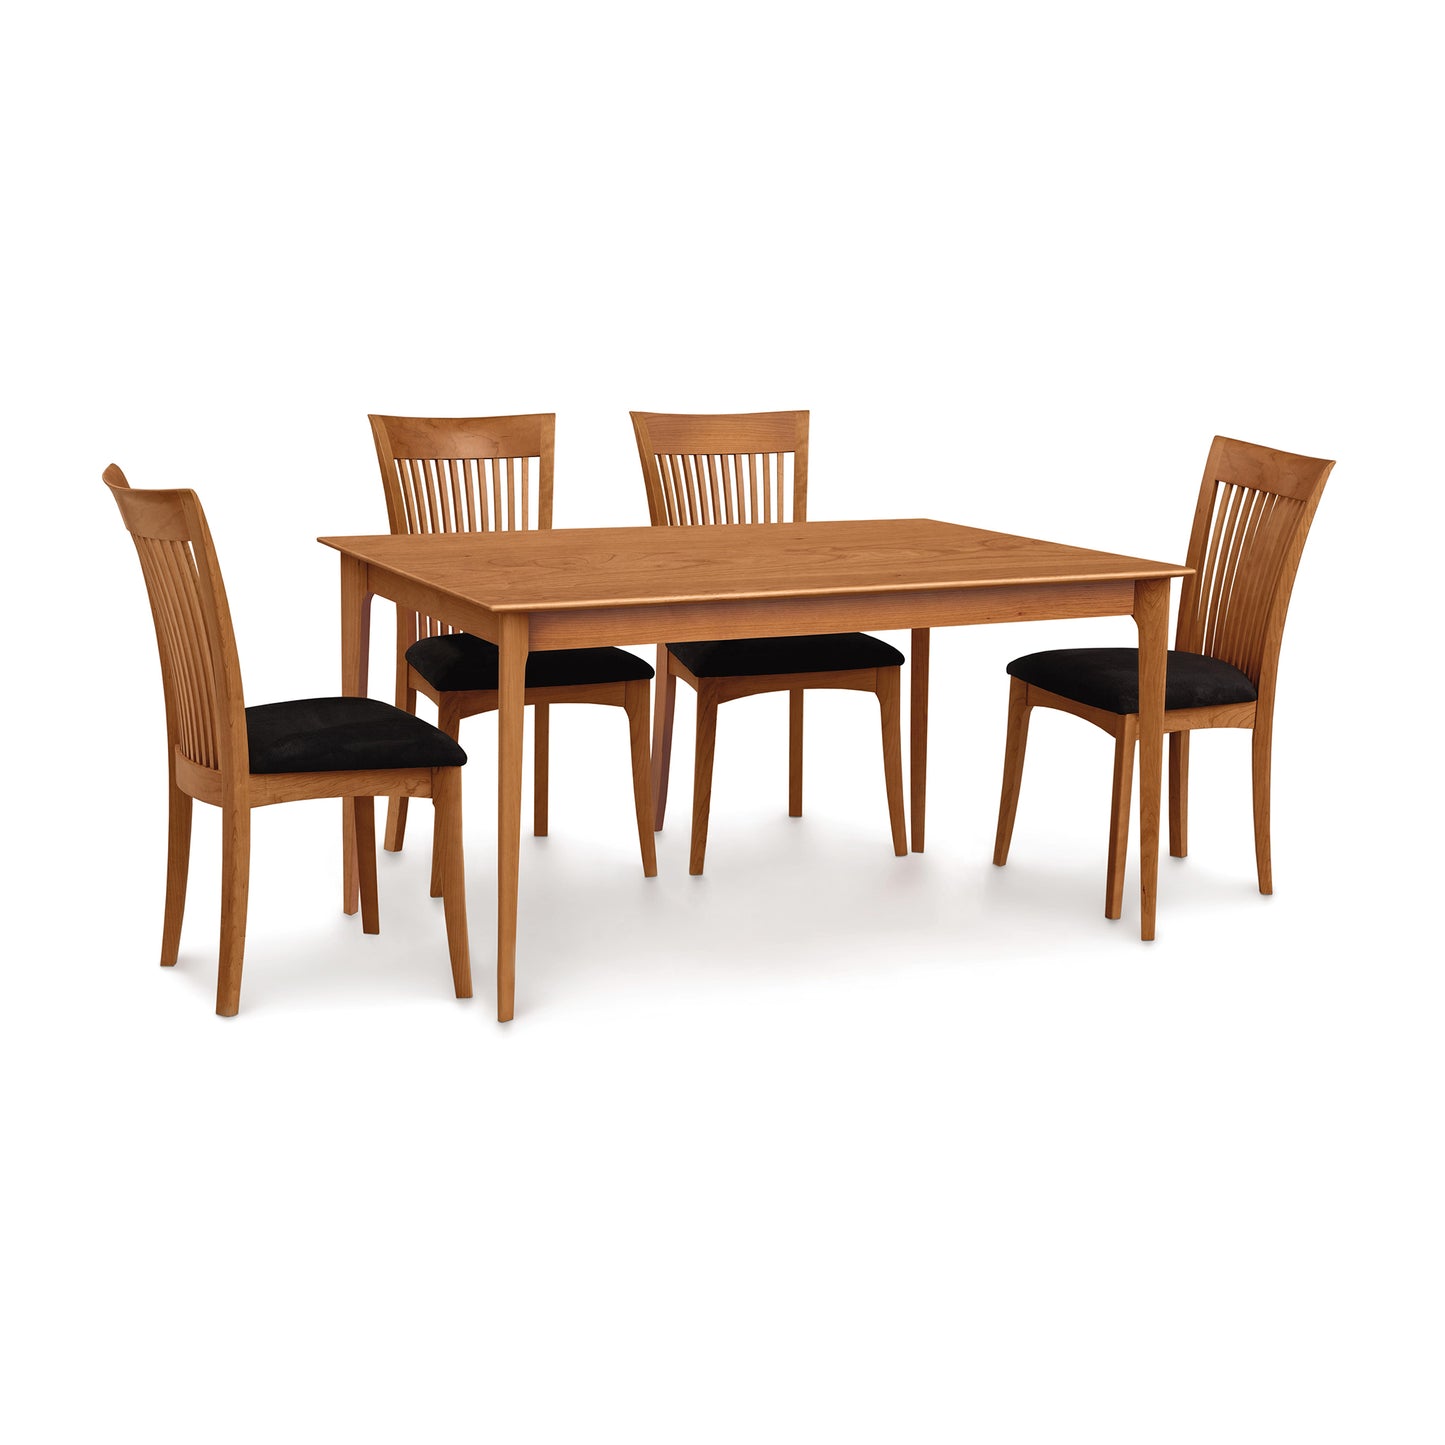 A Copeland Furniture Sarah Shaker Tapered Leg Solid Top Table with four matching chairs set on a white background.